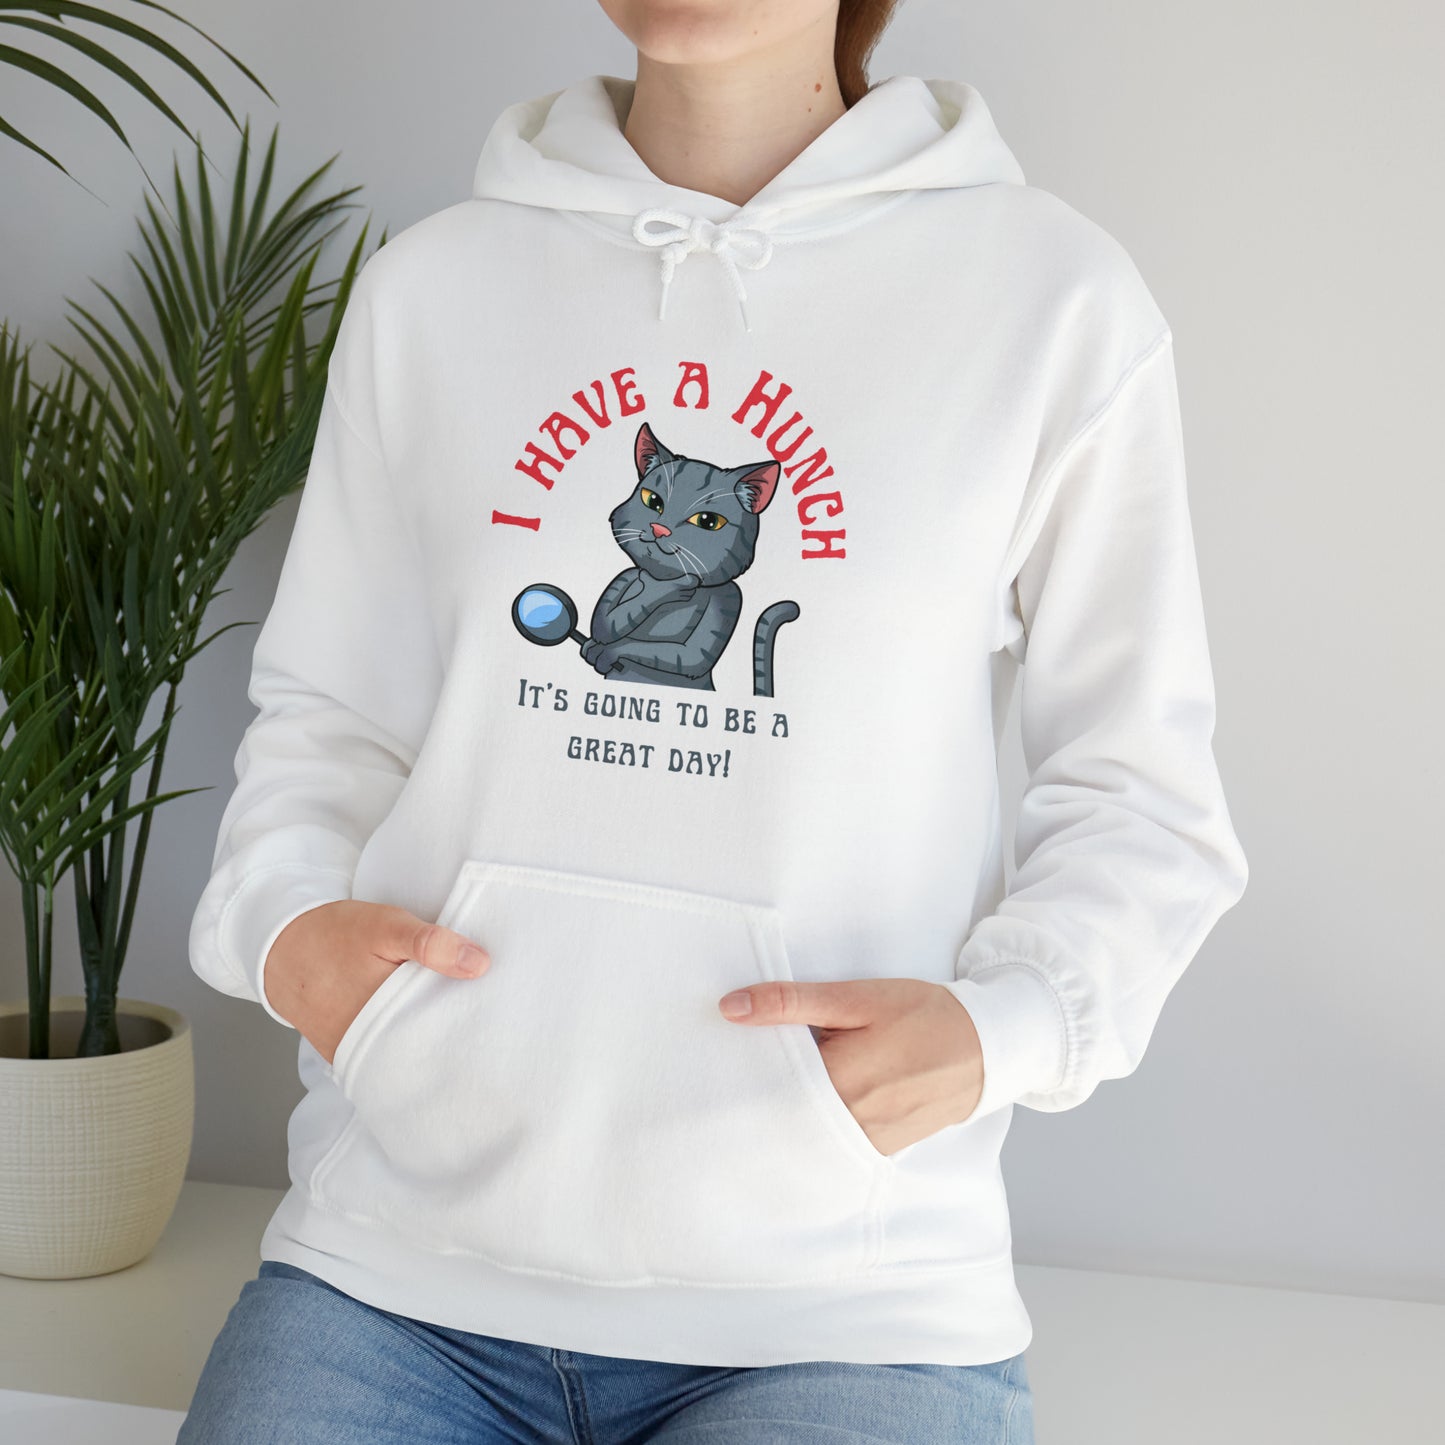 I have a Hunch it's going to be a great day! Unisex Heavy Blend™ Hooded Sweatshirt